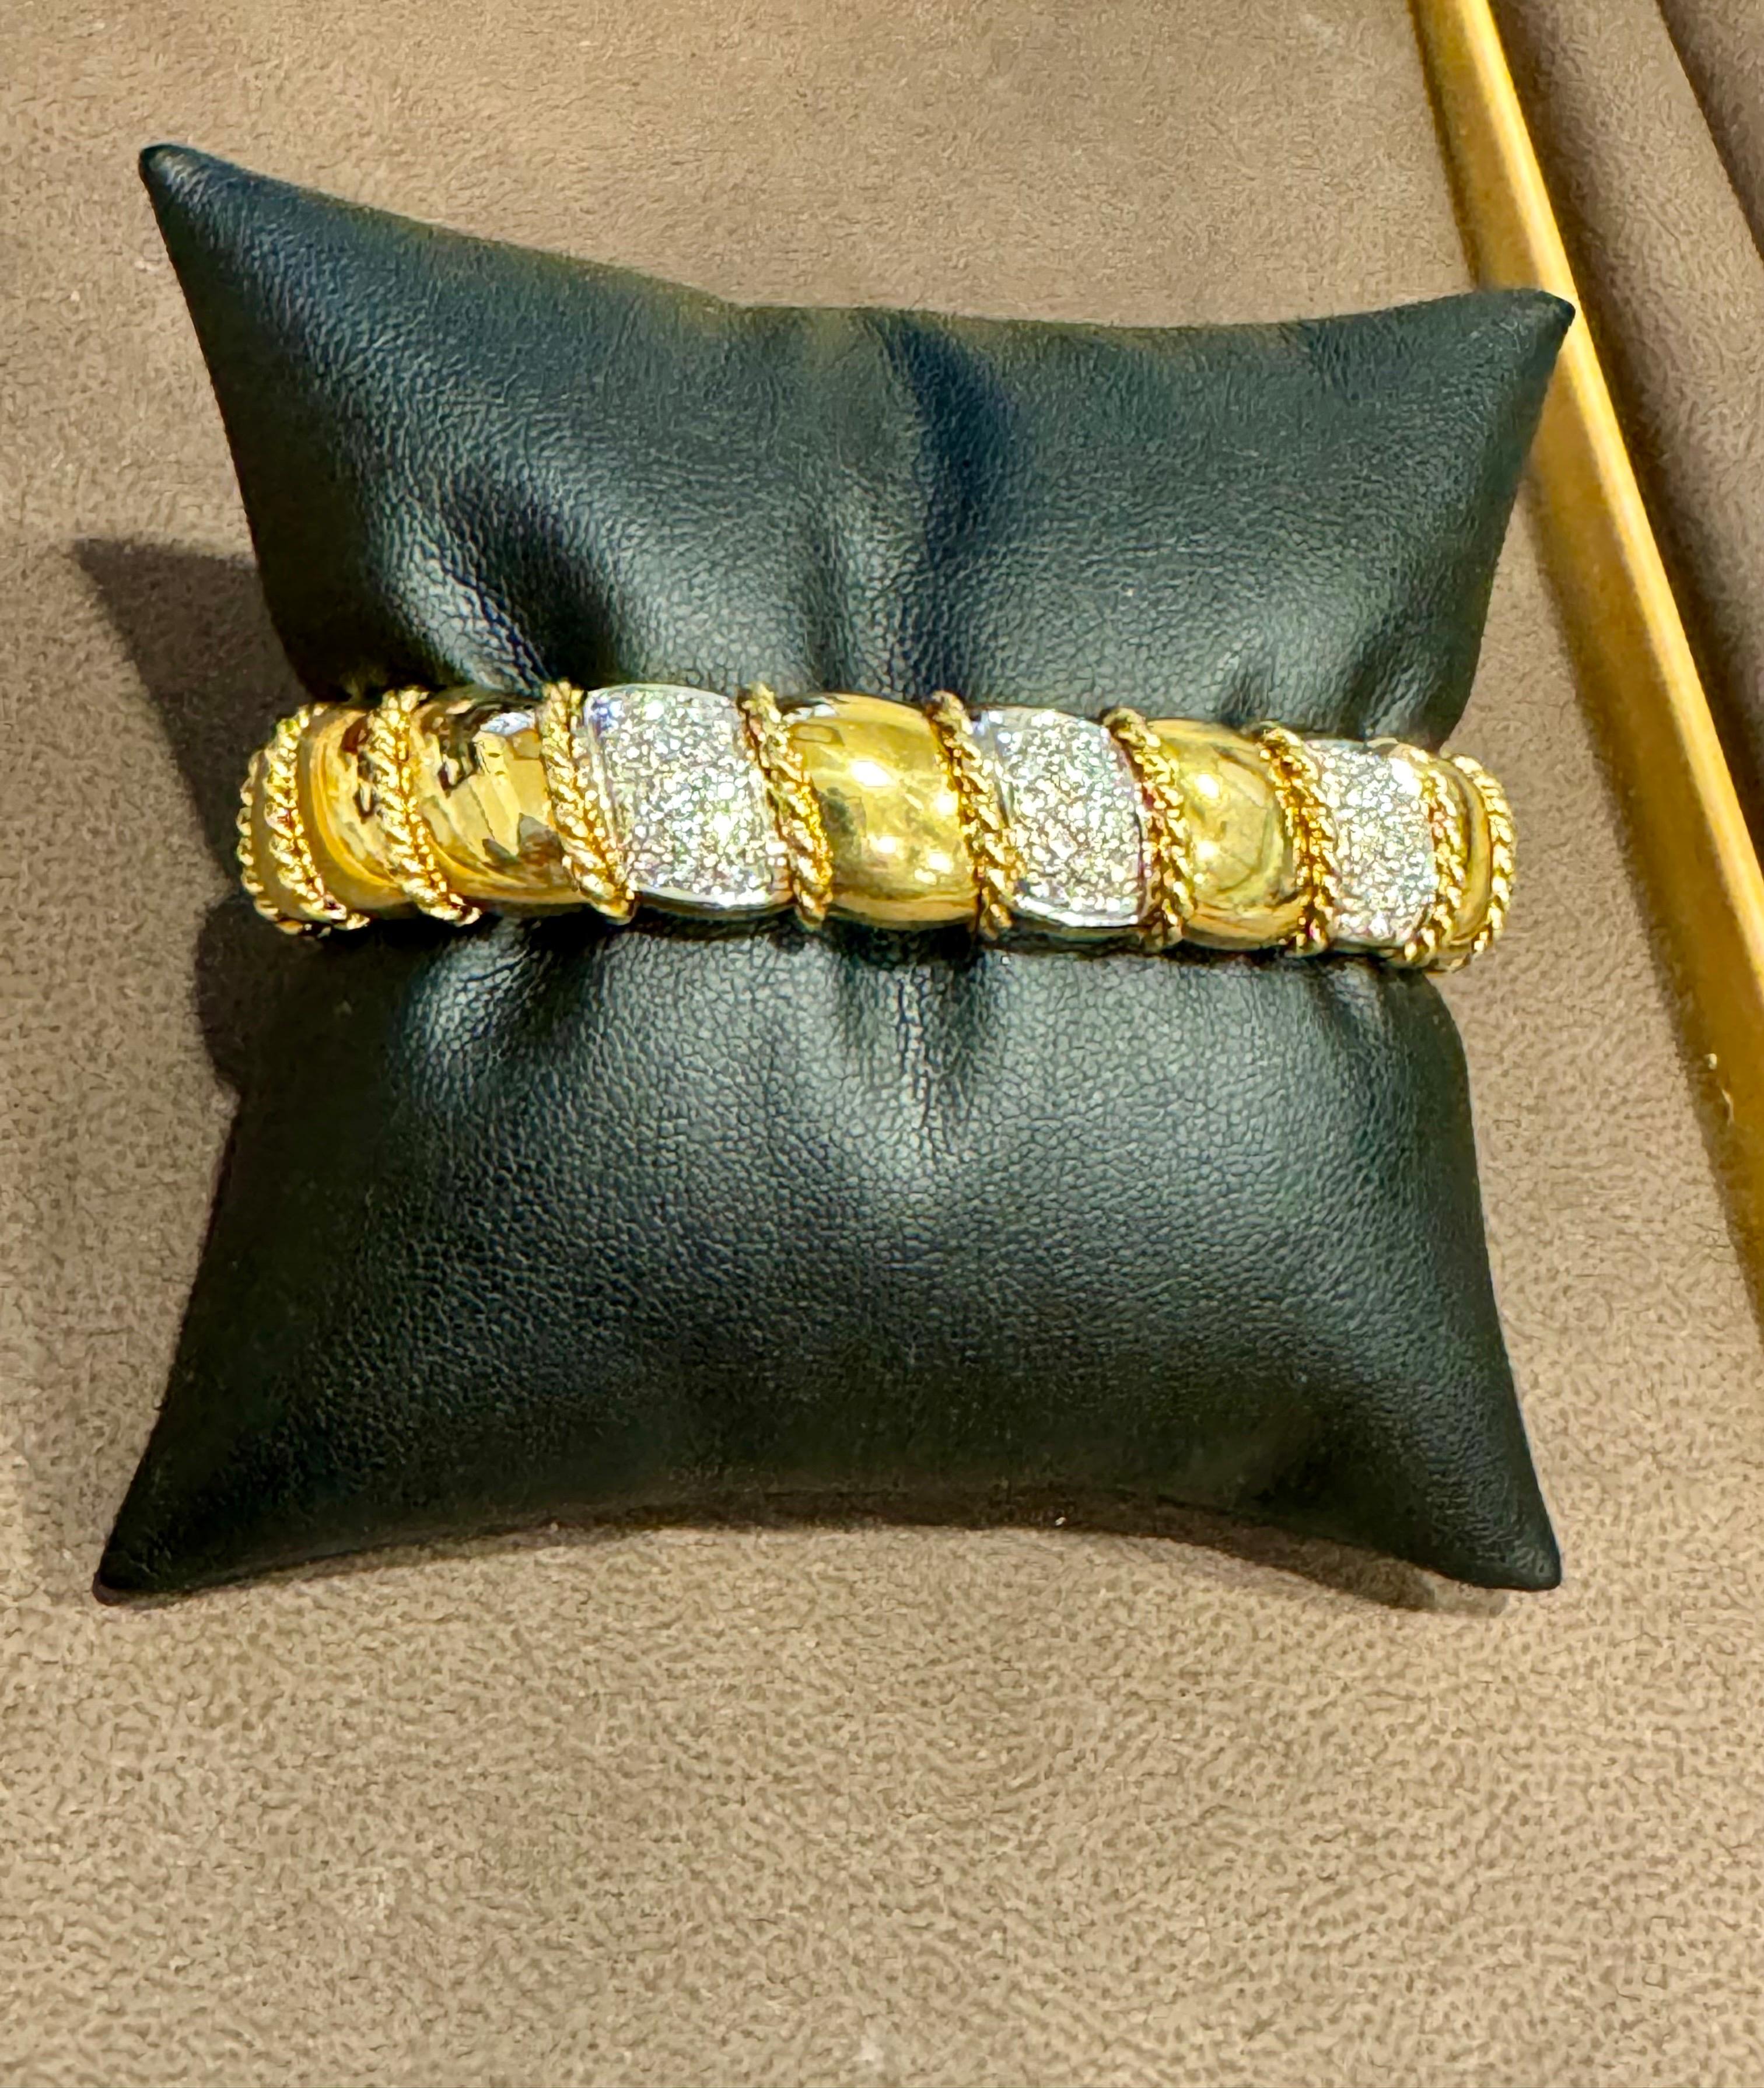 Vintage 2 Carats Diamond Cuff Bangle Bracelet 18 Karat Solid Yellow Gold 75 Gram In Excellent Condition For Sale In New York, NY